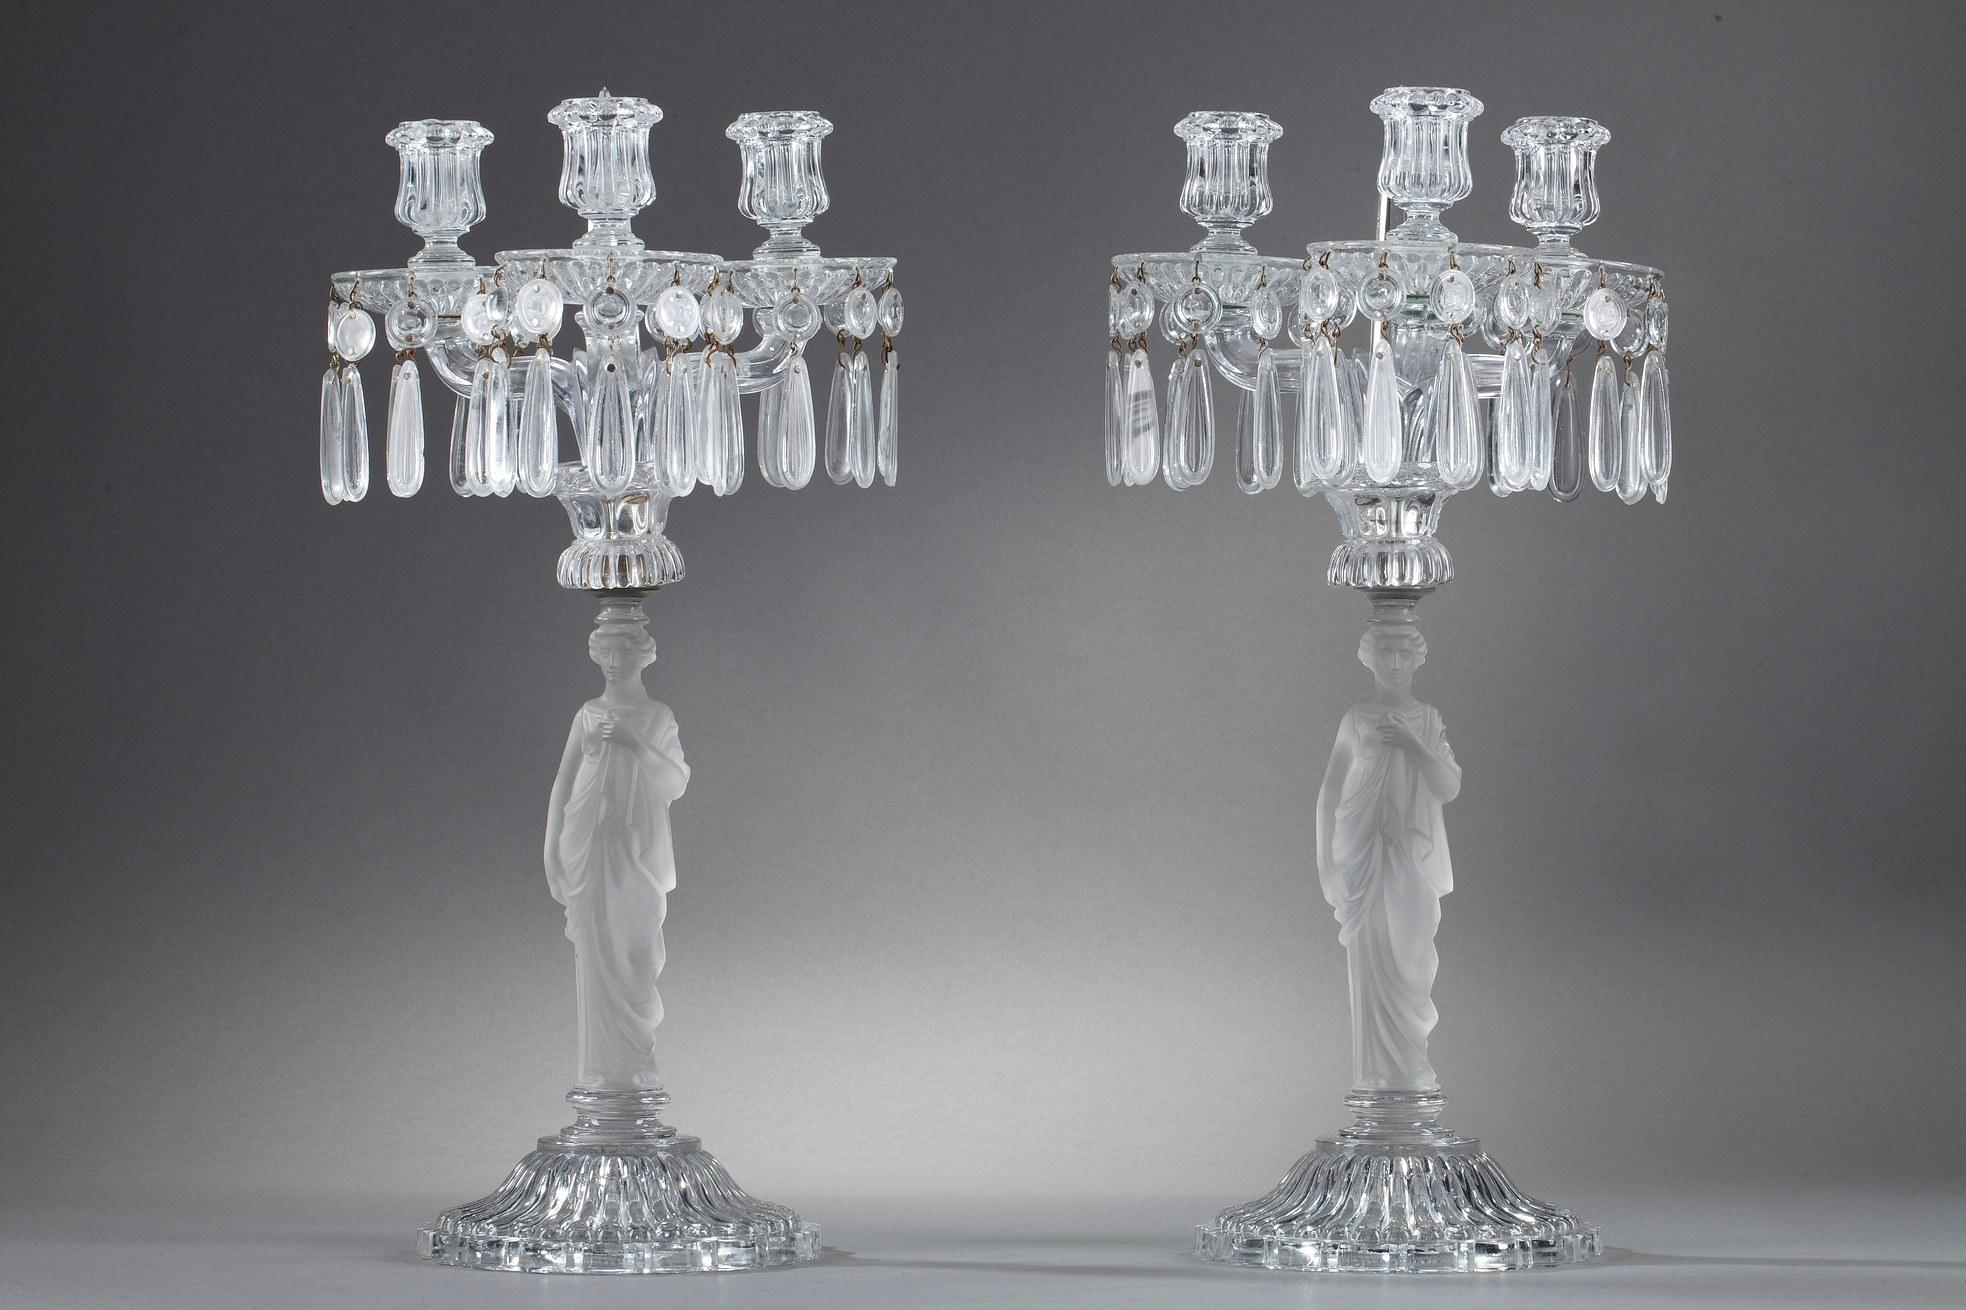 Pair of candelabras in molded and satin-finished crystal from Baccarat, featuring caryatids on which rest three arms of light decorated with crystal pendants. The central shaft in satin-finish crystal is sculpted with draped caryatids with